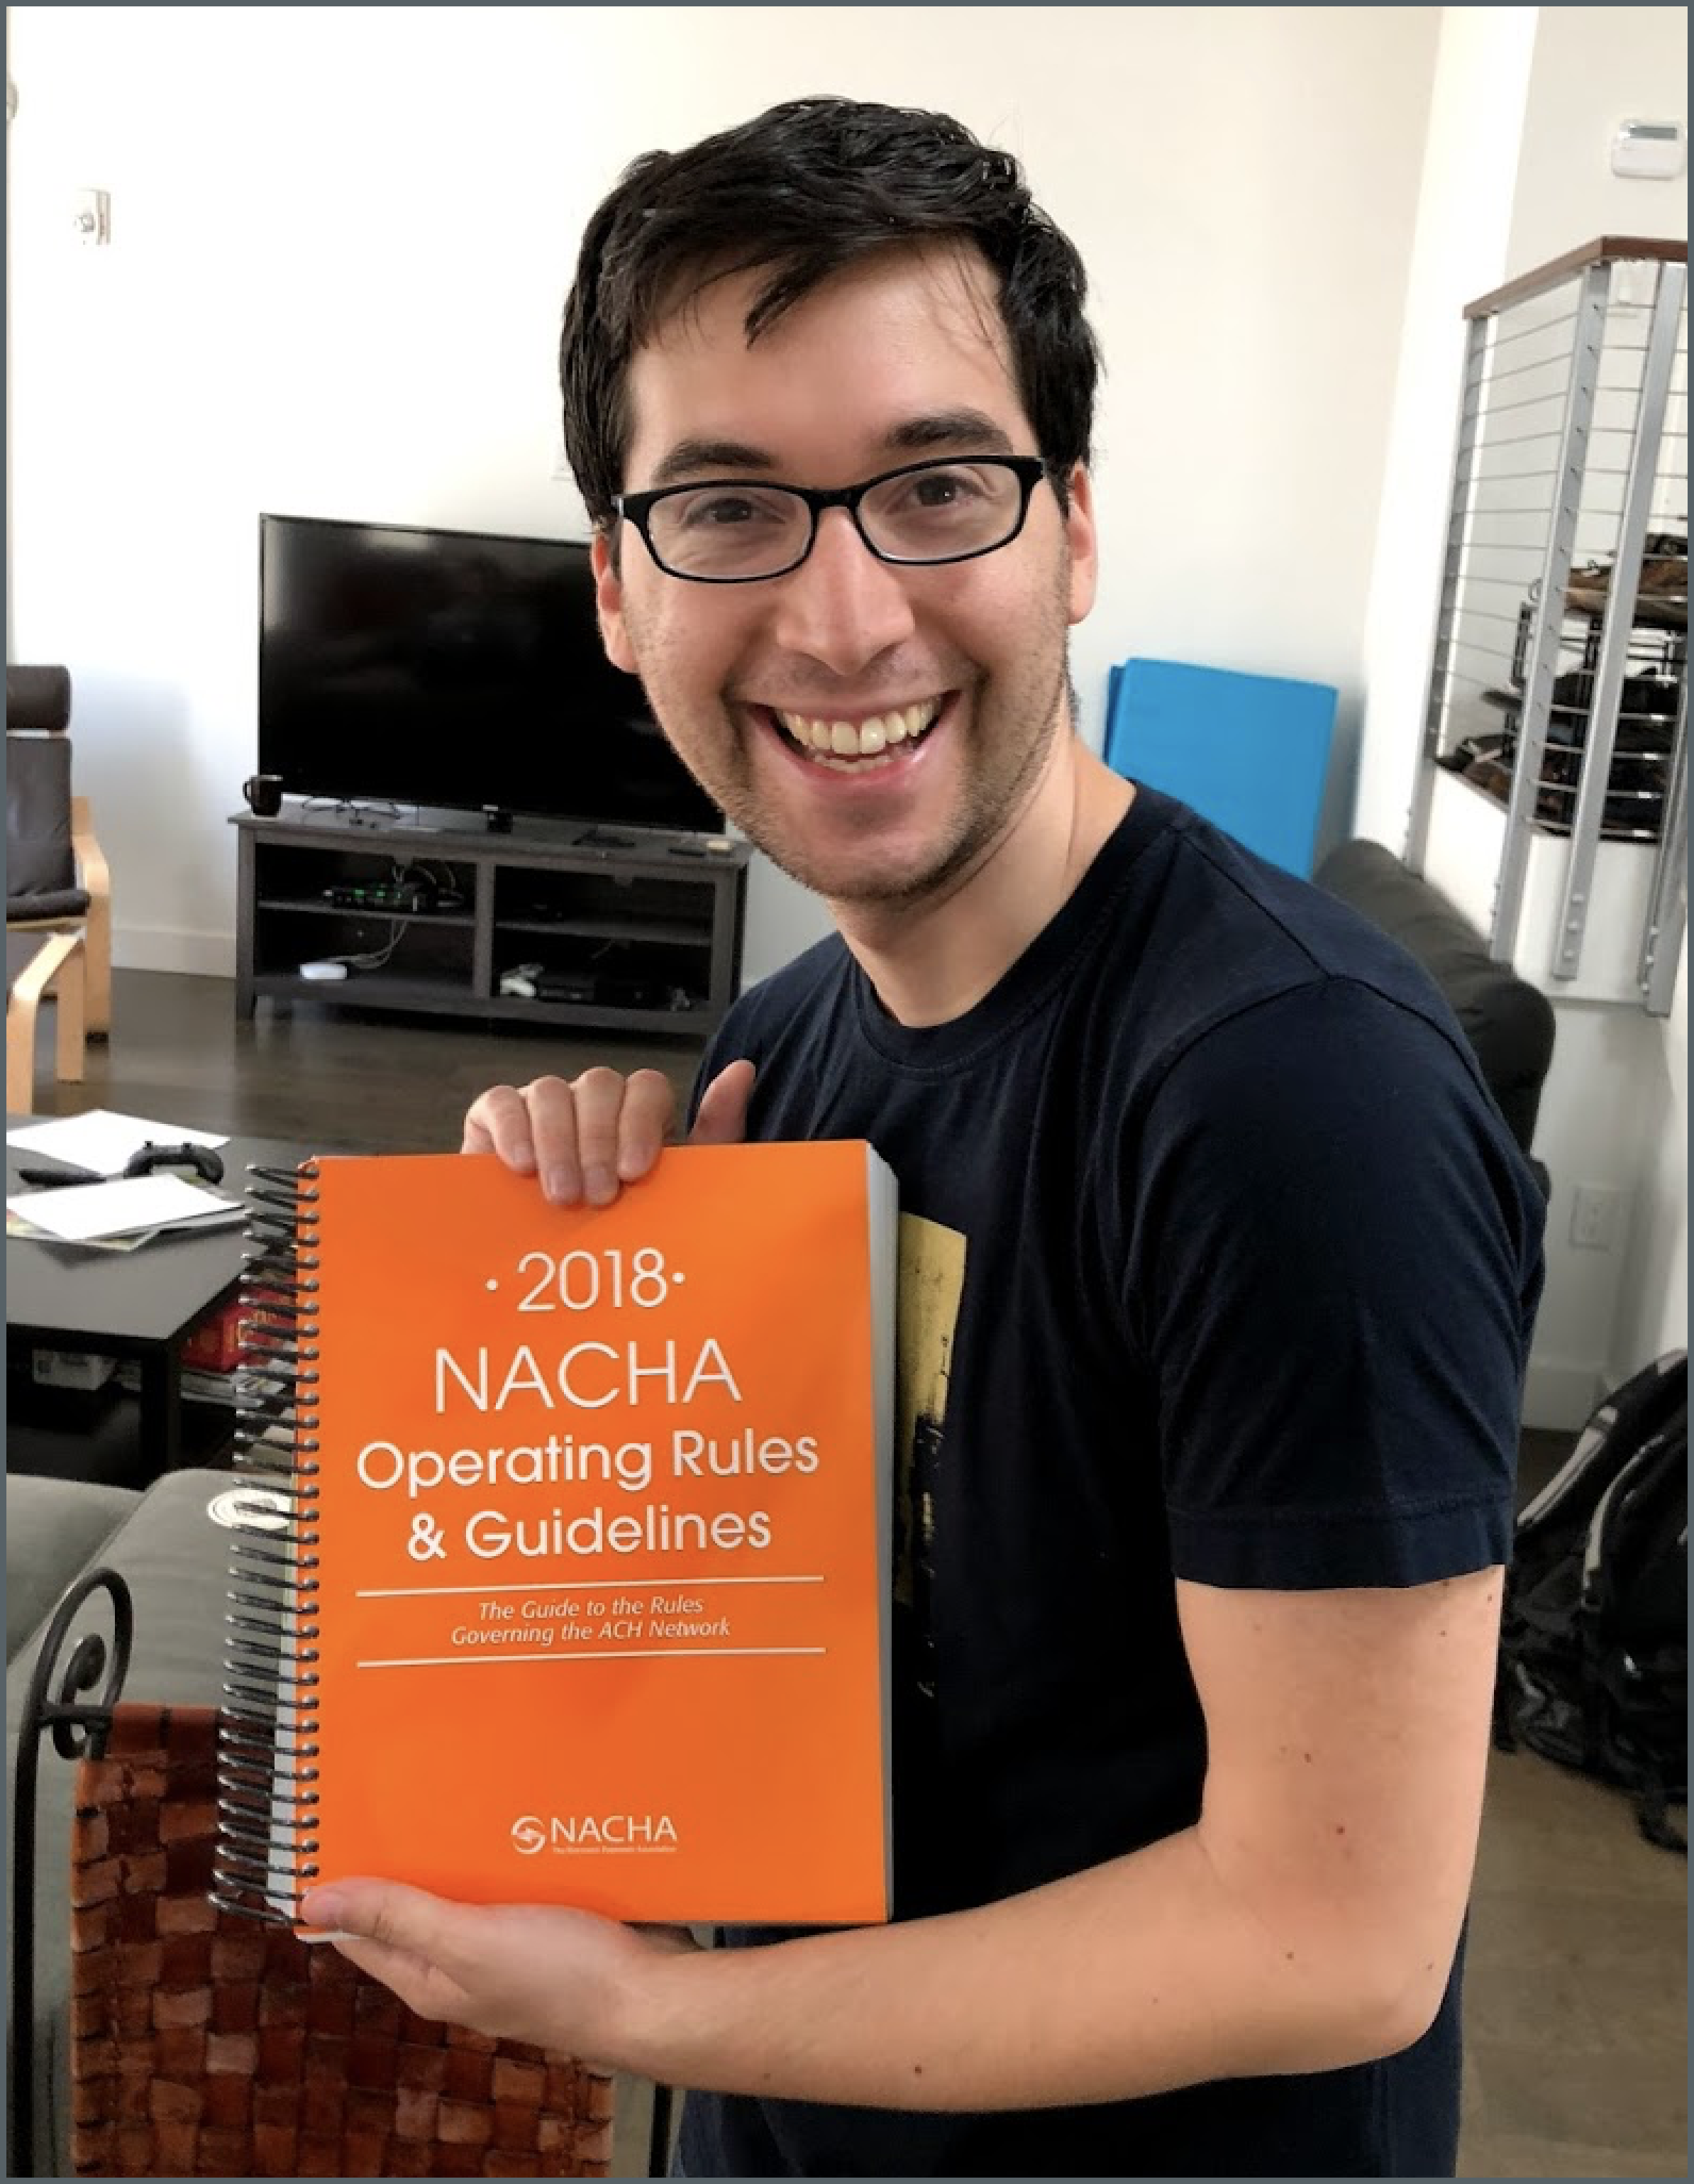 Co-founder Sam Aarons holding up the 2018 NACHA Operating Rules & Guidelines